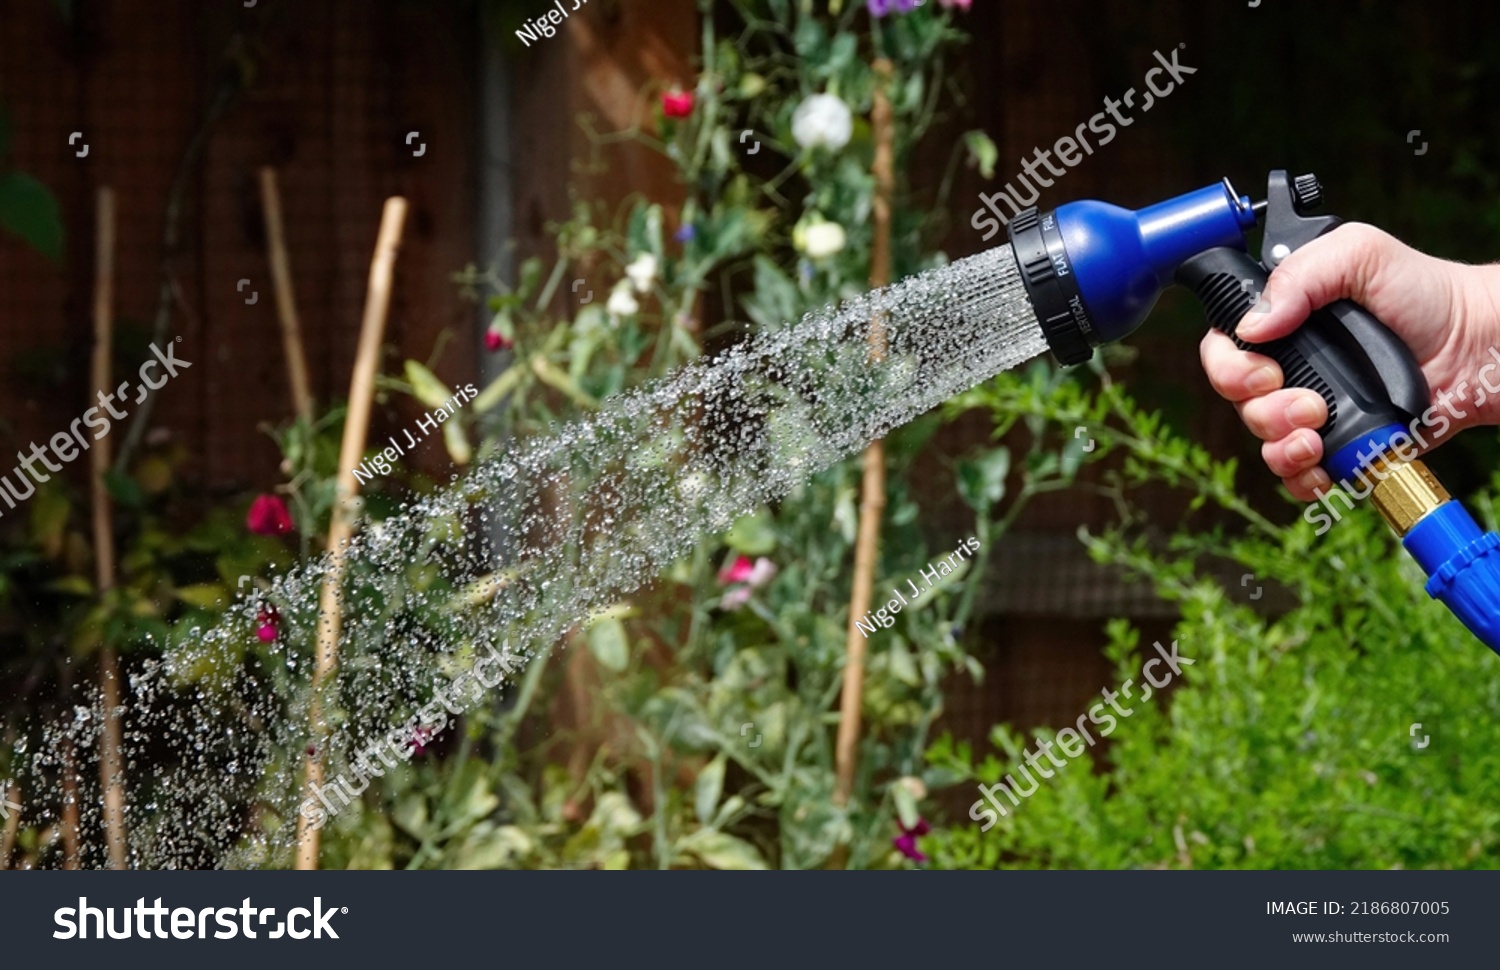 A hosepipe being used to water a garden in summer. #2186807005